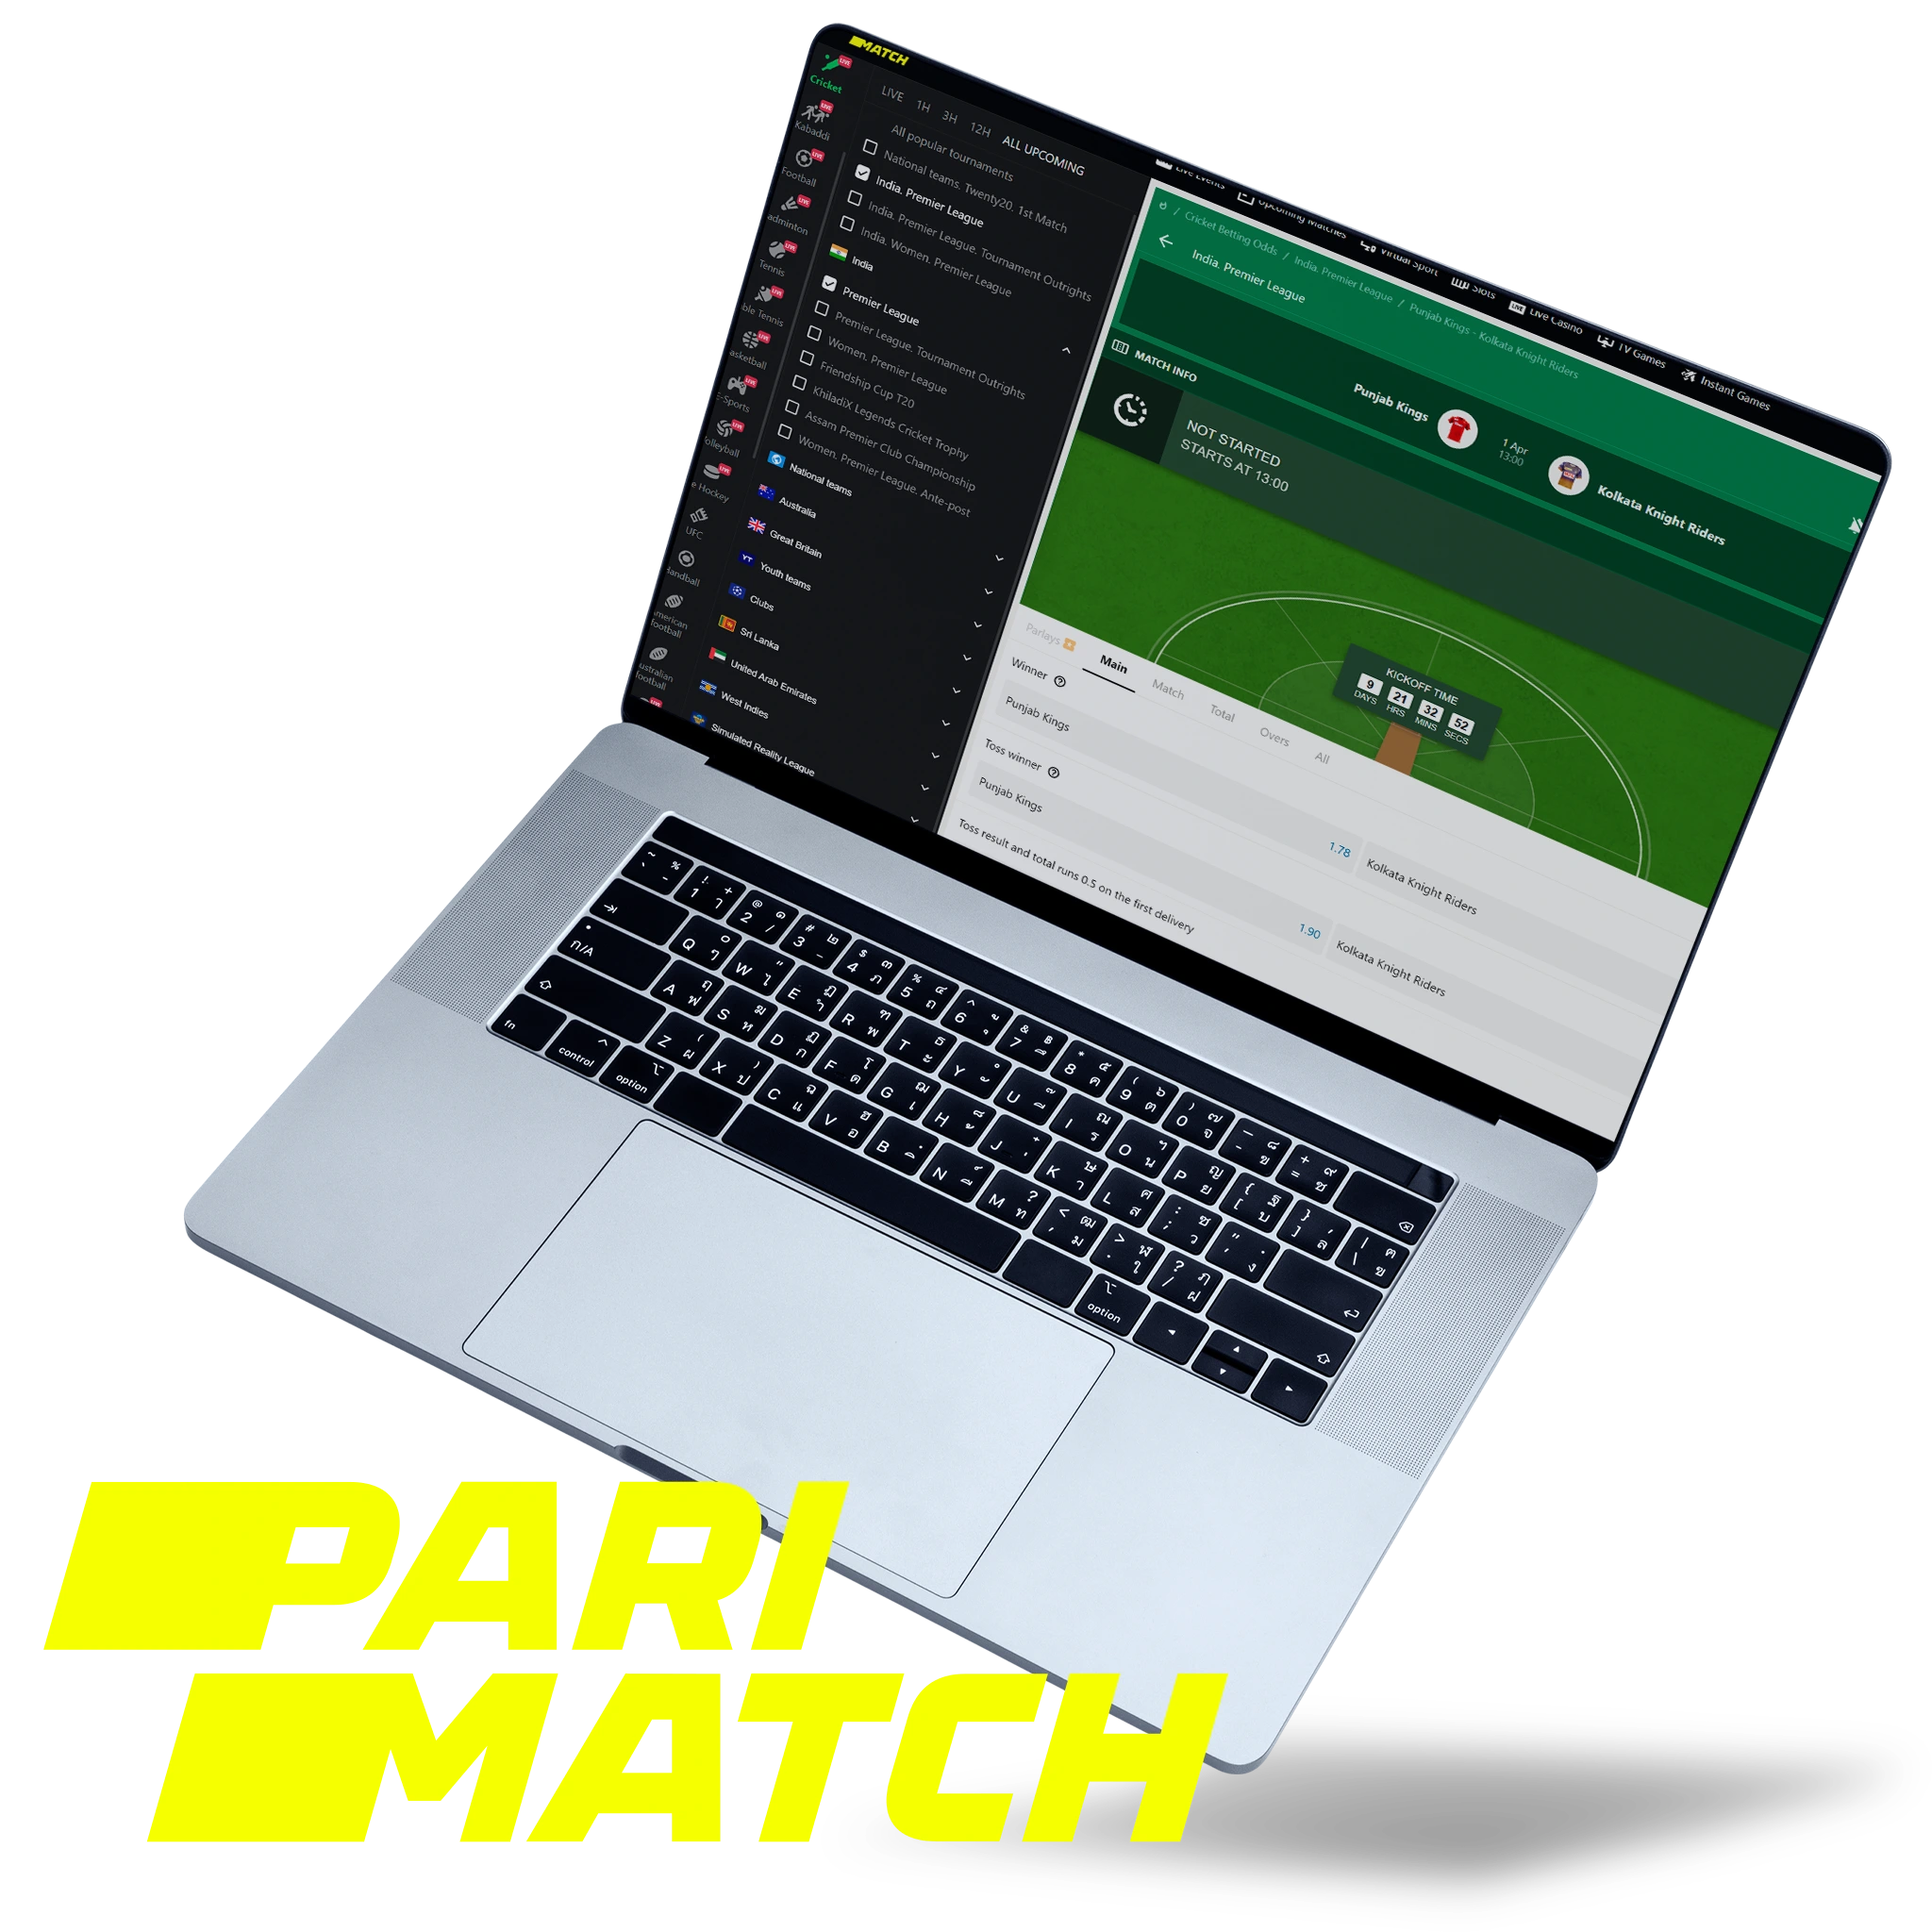 On Parimatch, you can easily place a  bet on any IPL cricket event.